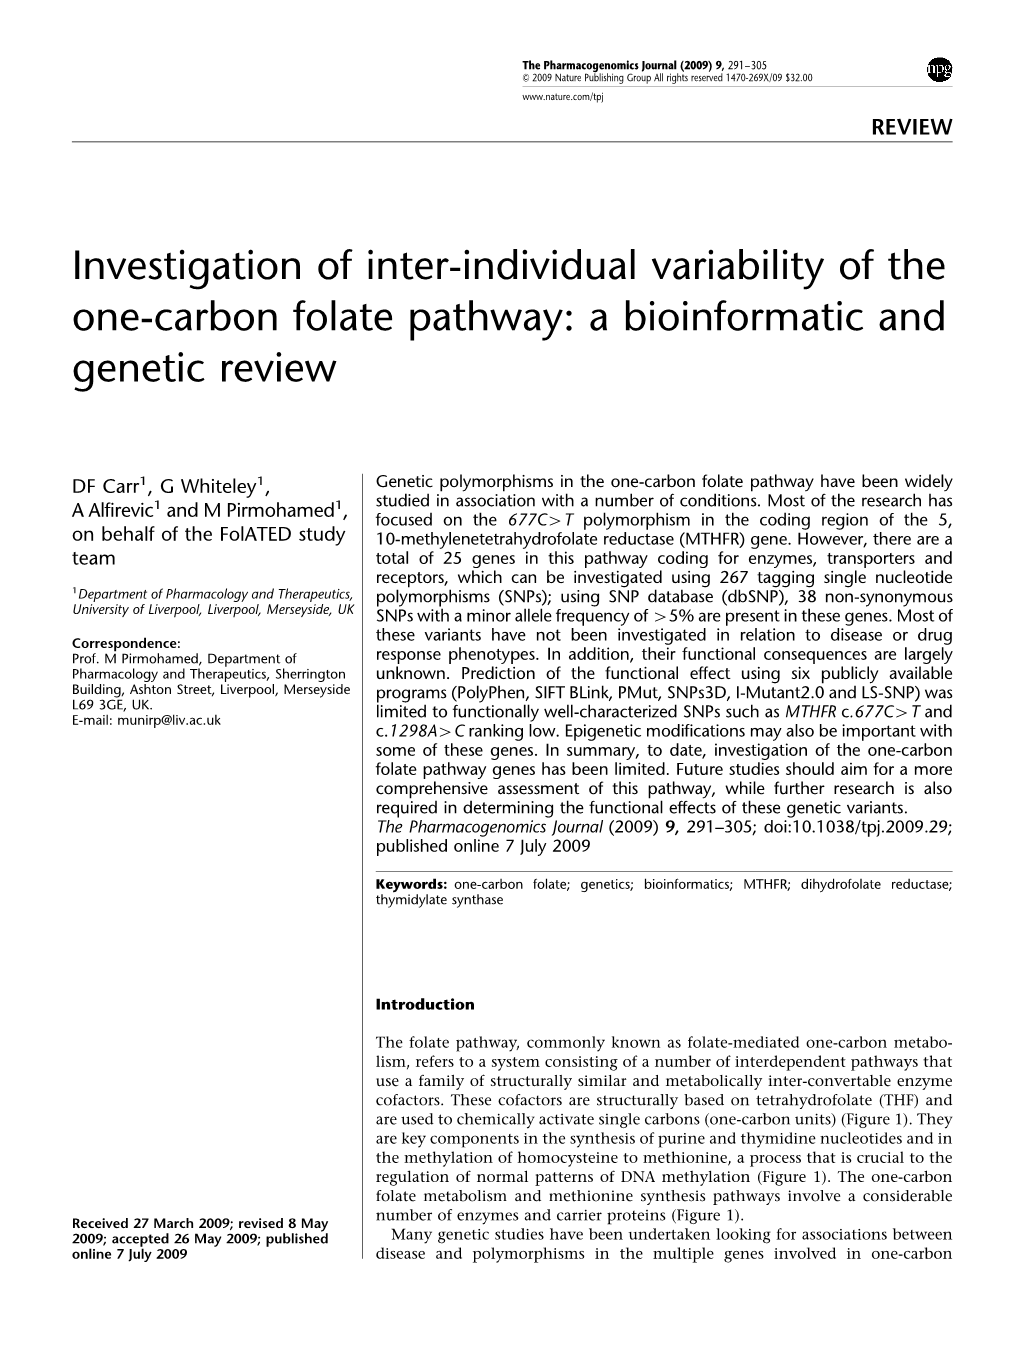 Investigation of Inter-Individual Variability of the One-Carbon Folate Pathway: a Bioinformatic and Genetic Review